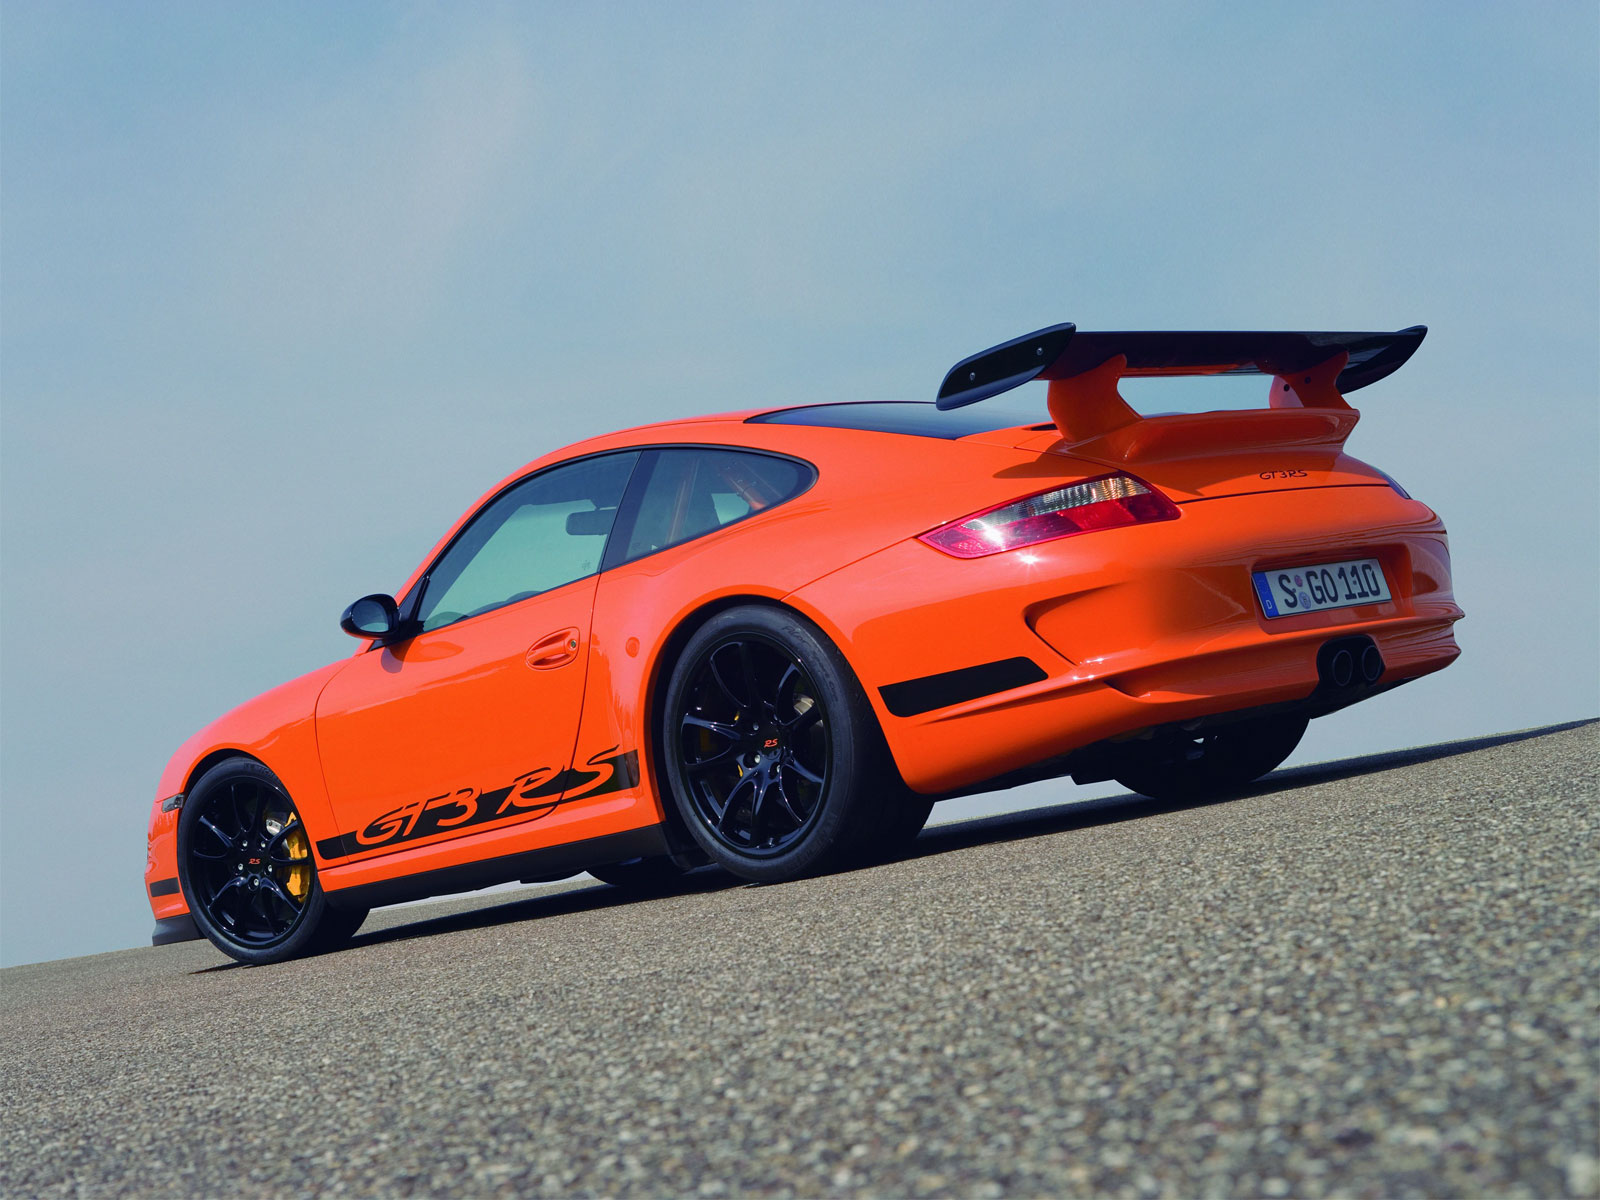 Porsche Gt3 RS Tuning Rear Side View HD Wallpapers